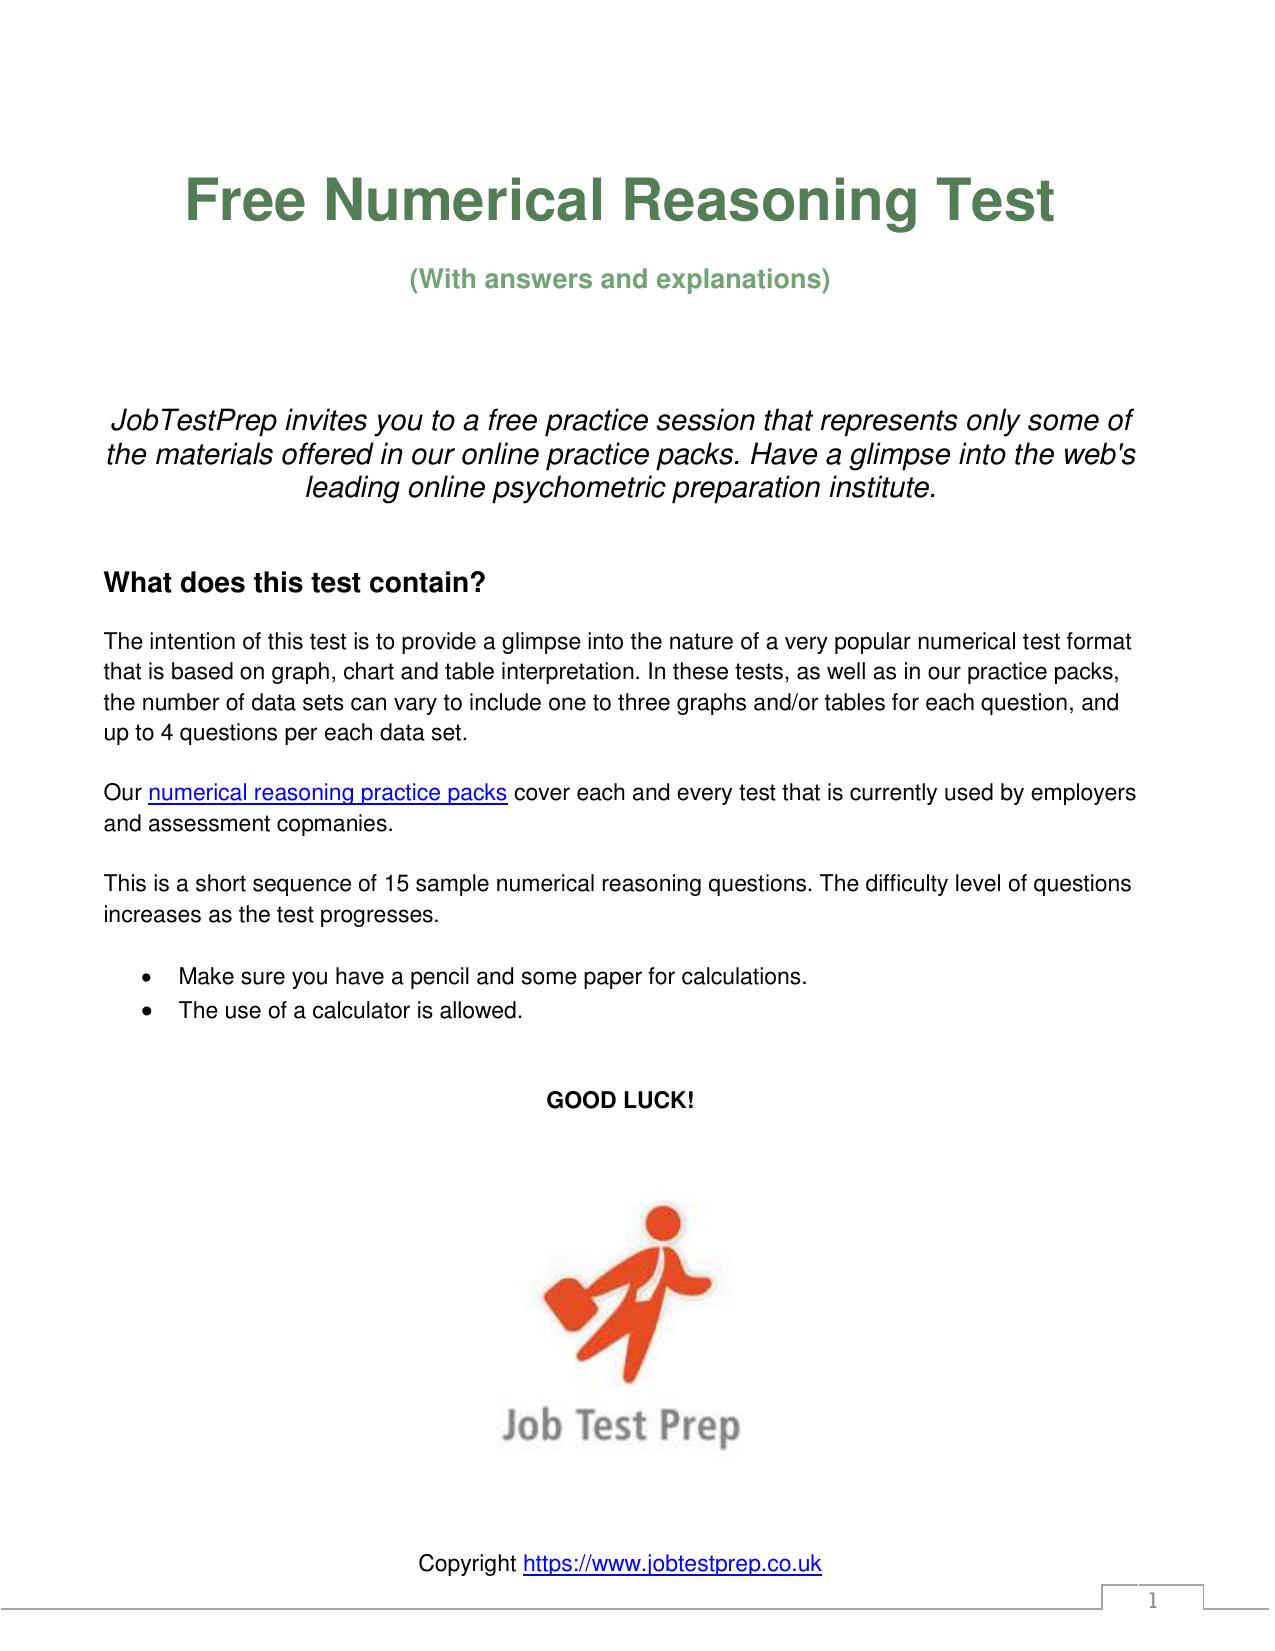 Free Numerical Reasoning Test Questions and Answers